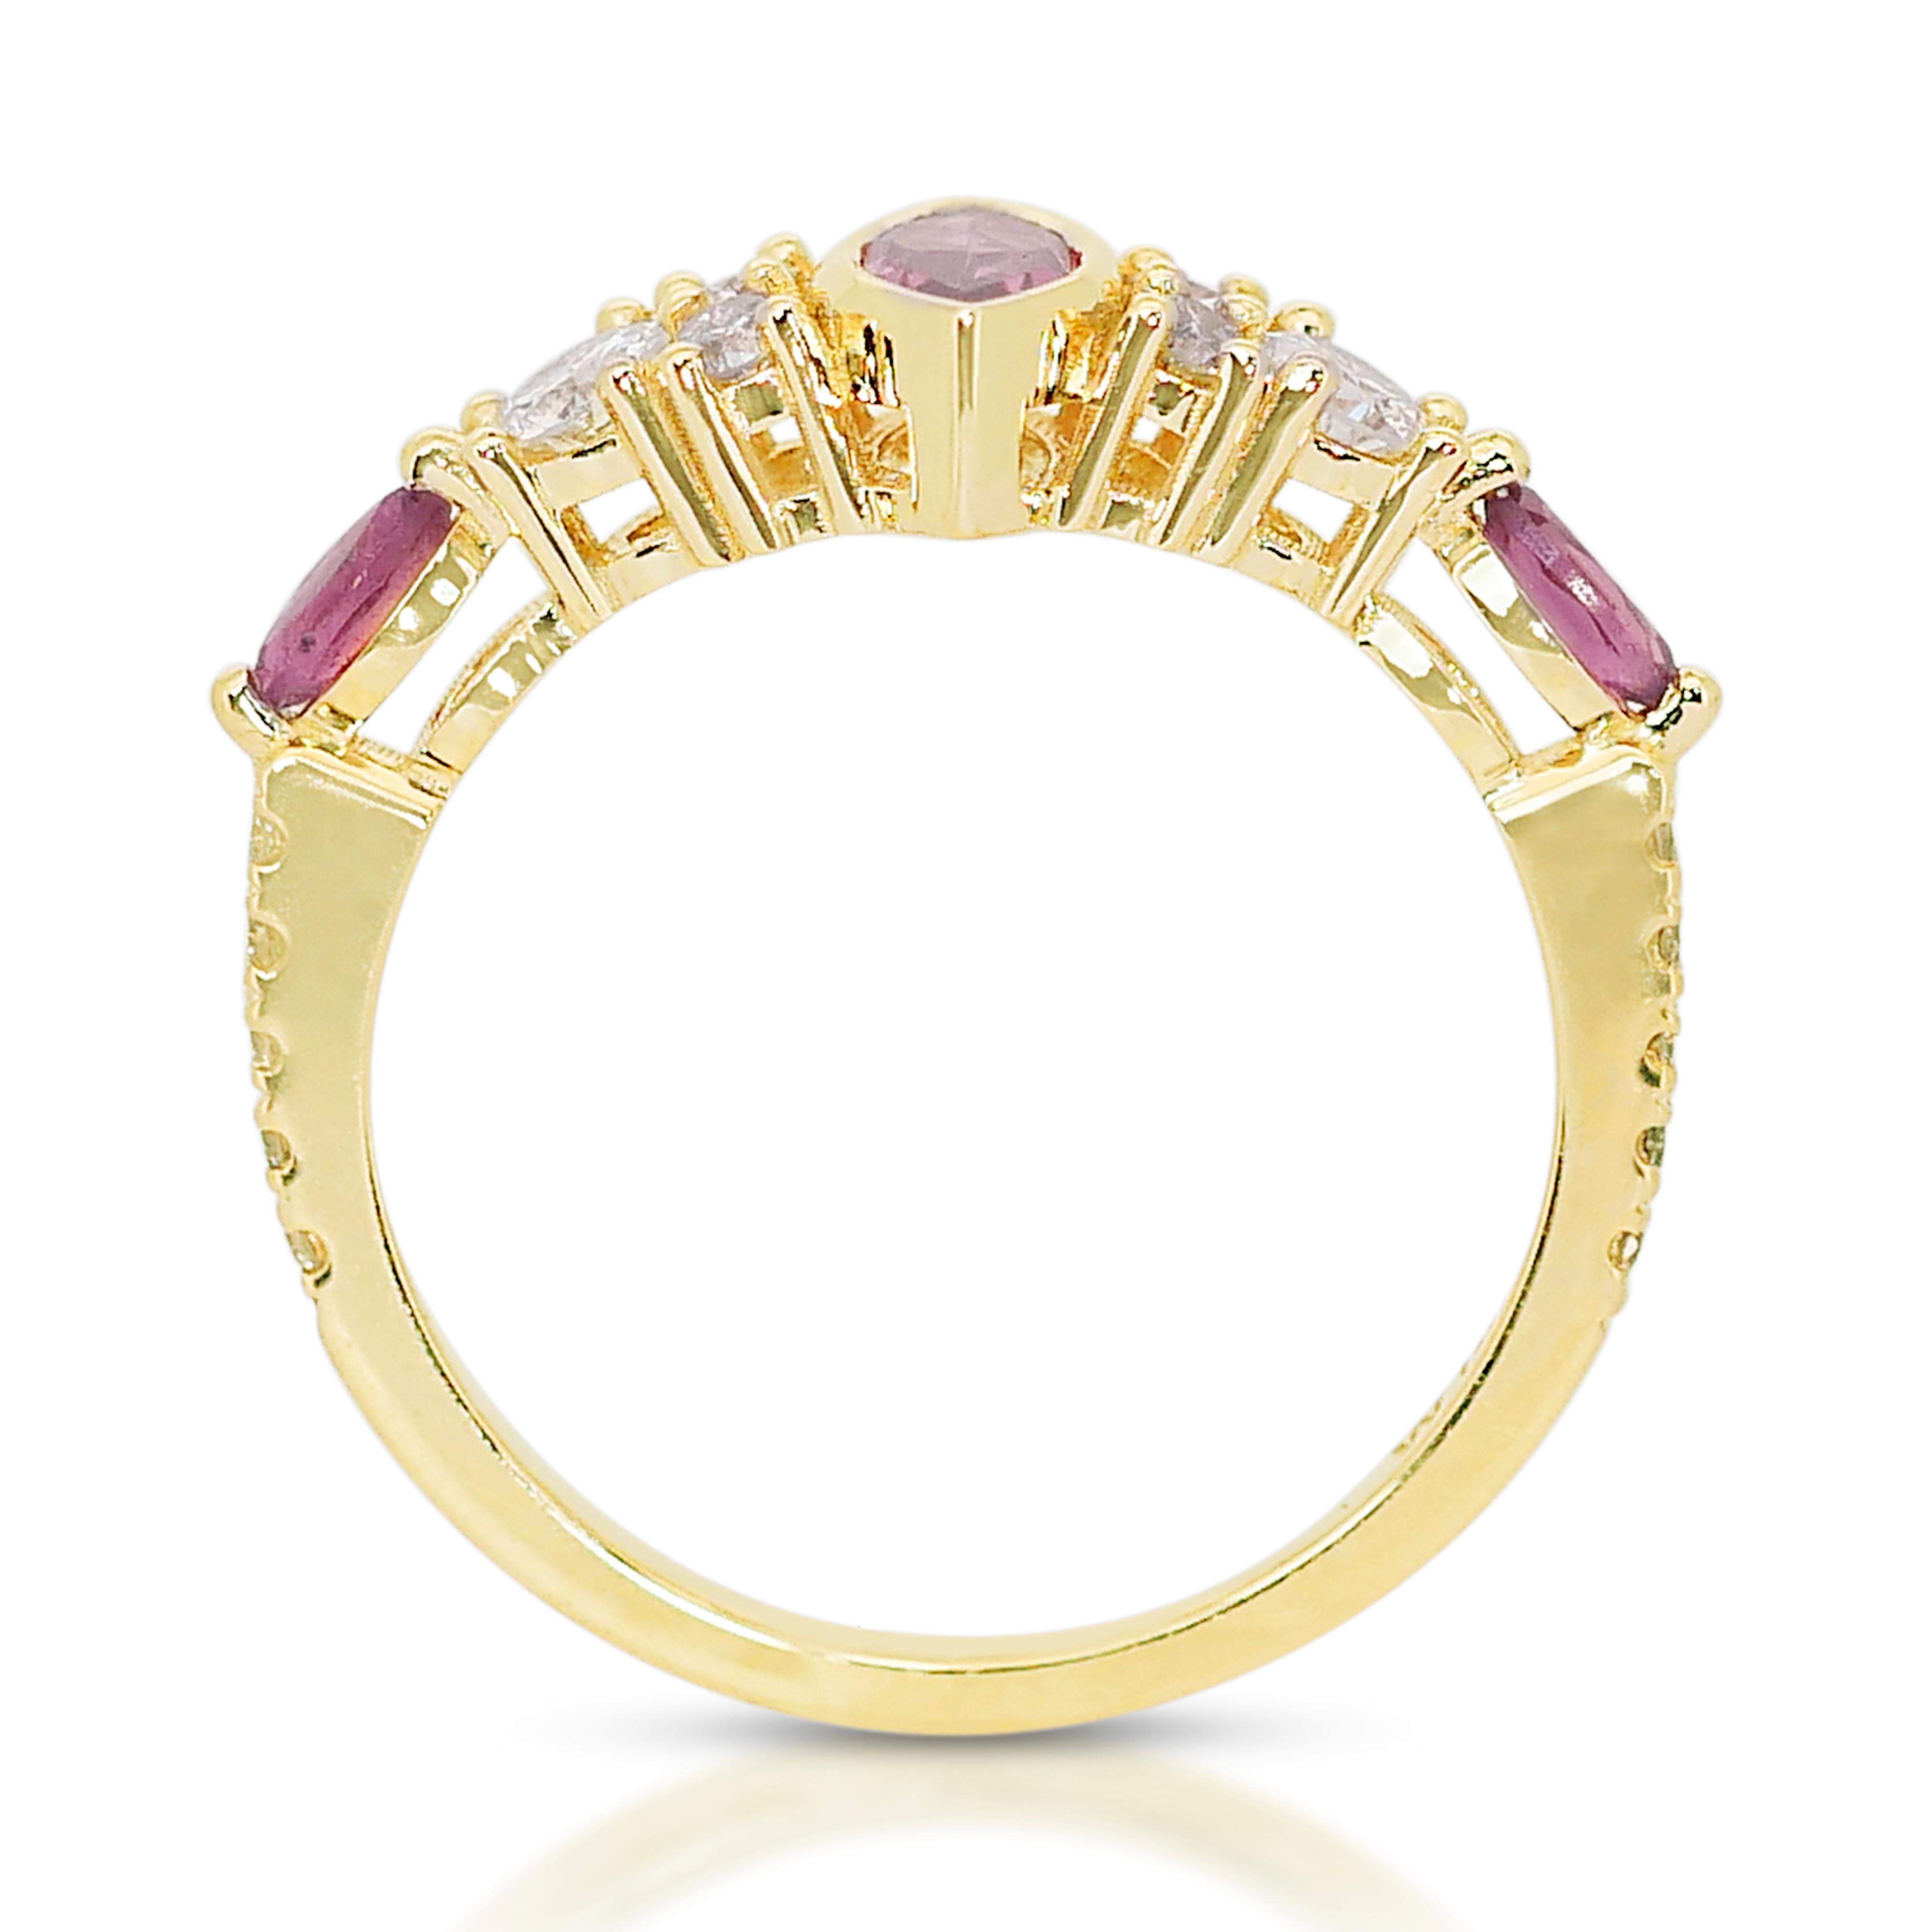 Fascinating 14k Yellow Gold Sapphire & Diamond Pave Ring w/1.02 ct-IGI Certified For Sale 1